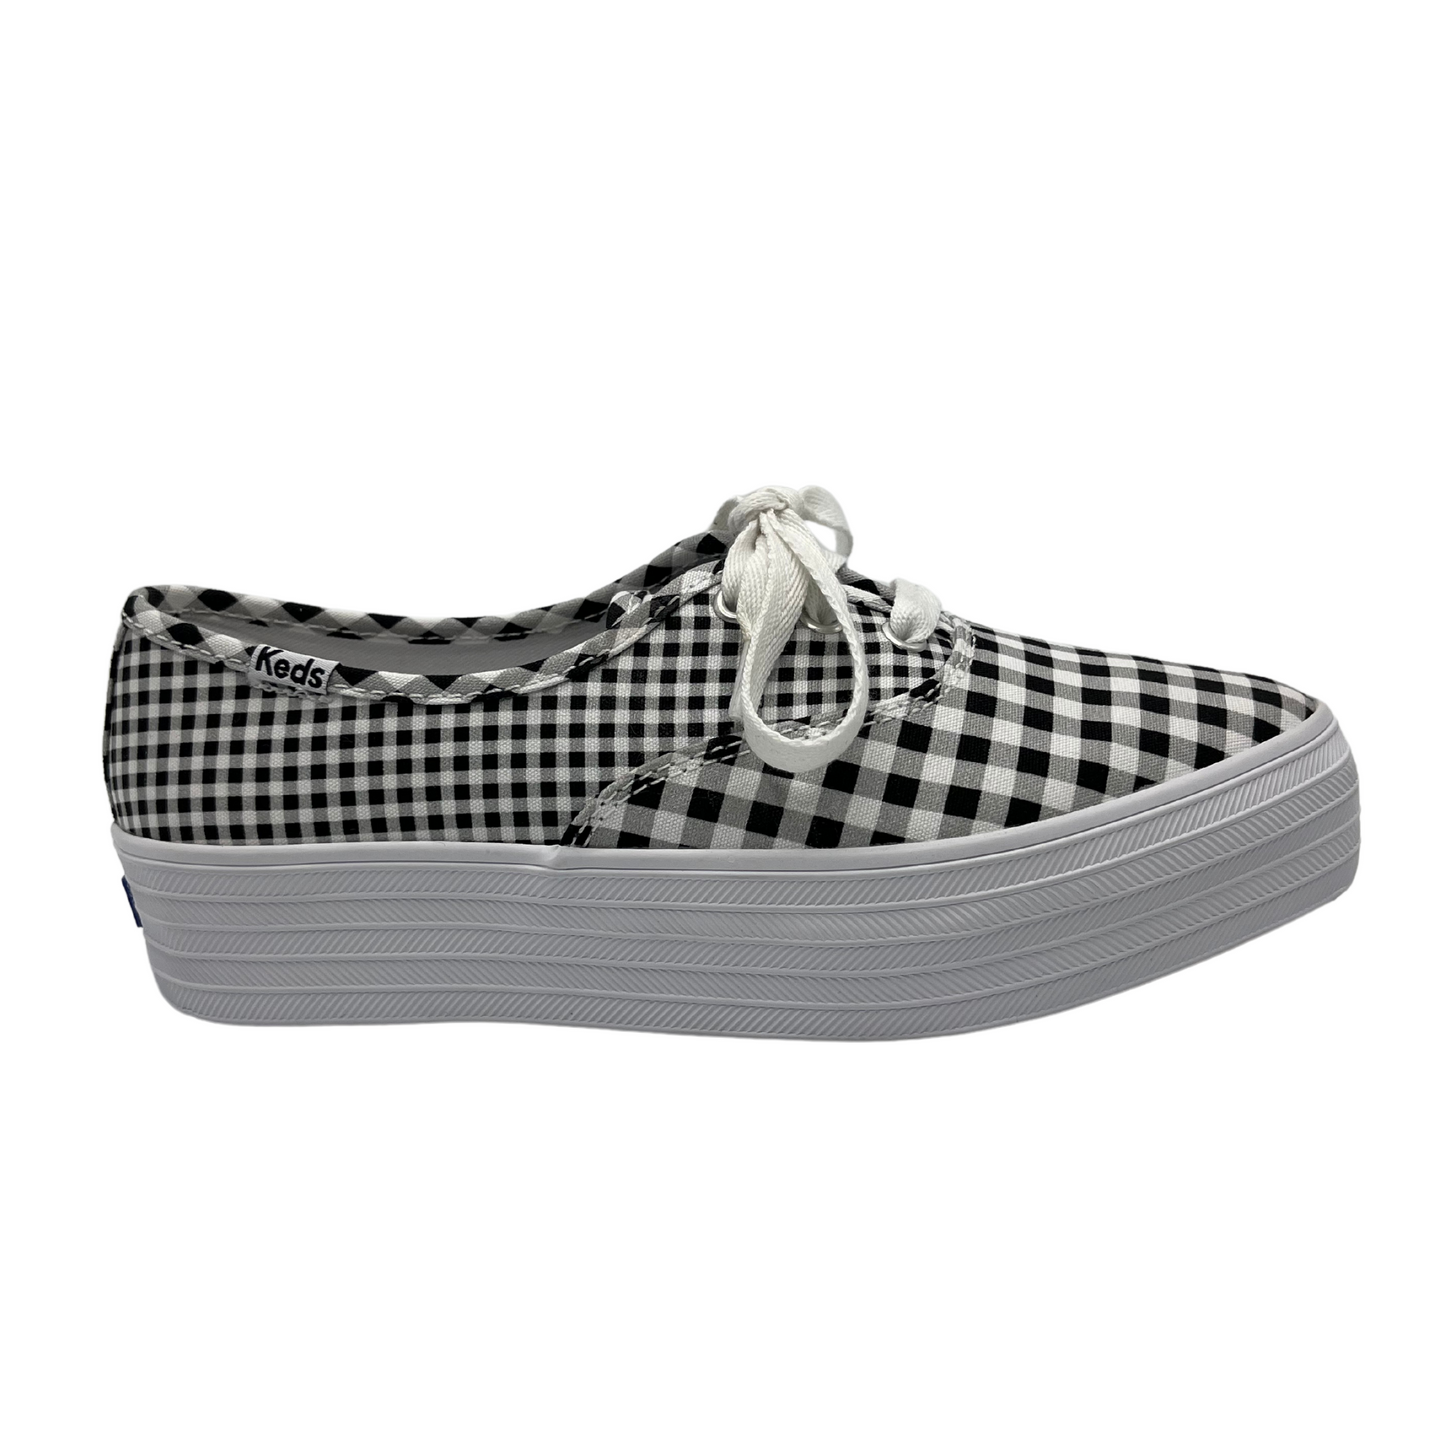 Right facing view of platform, pointed toe sneaker with white laces and black and white gingham design